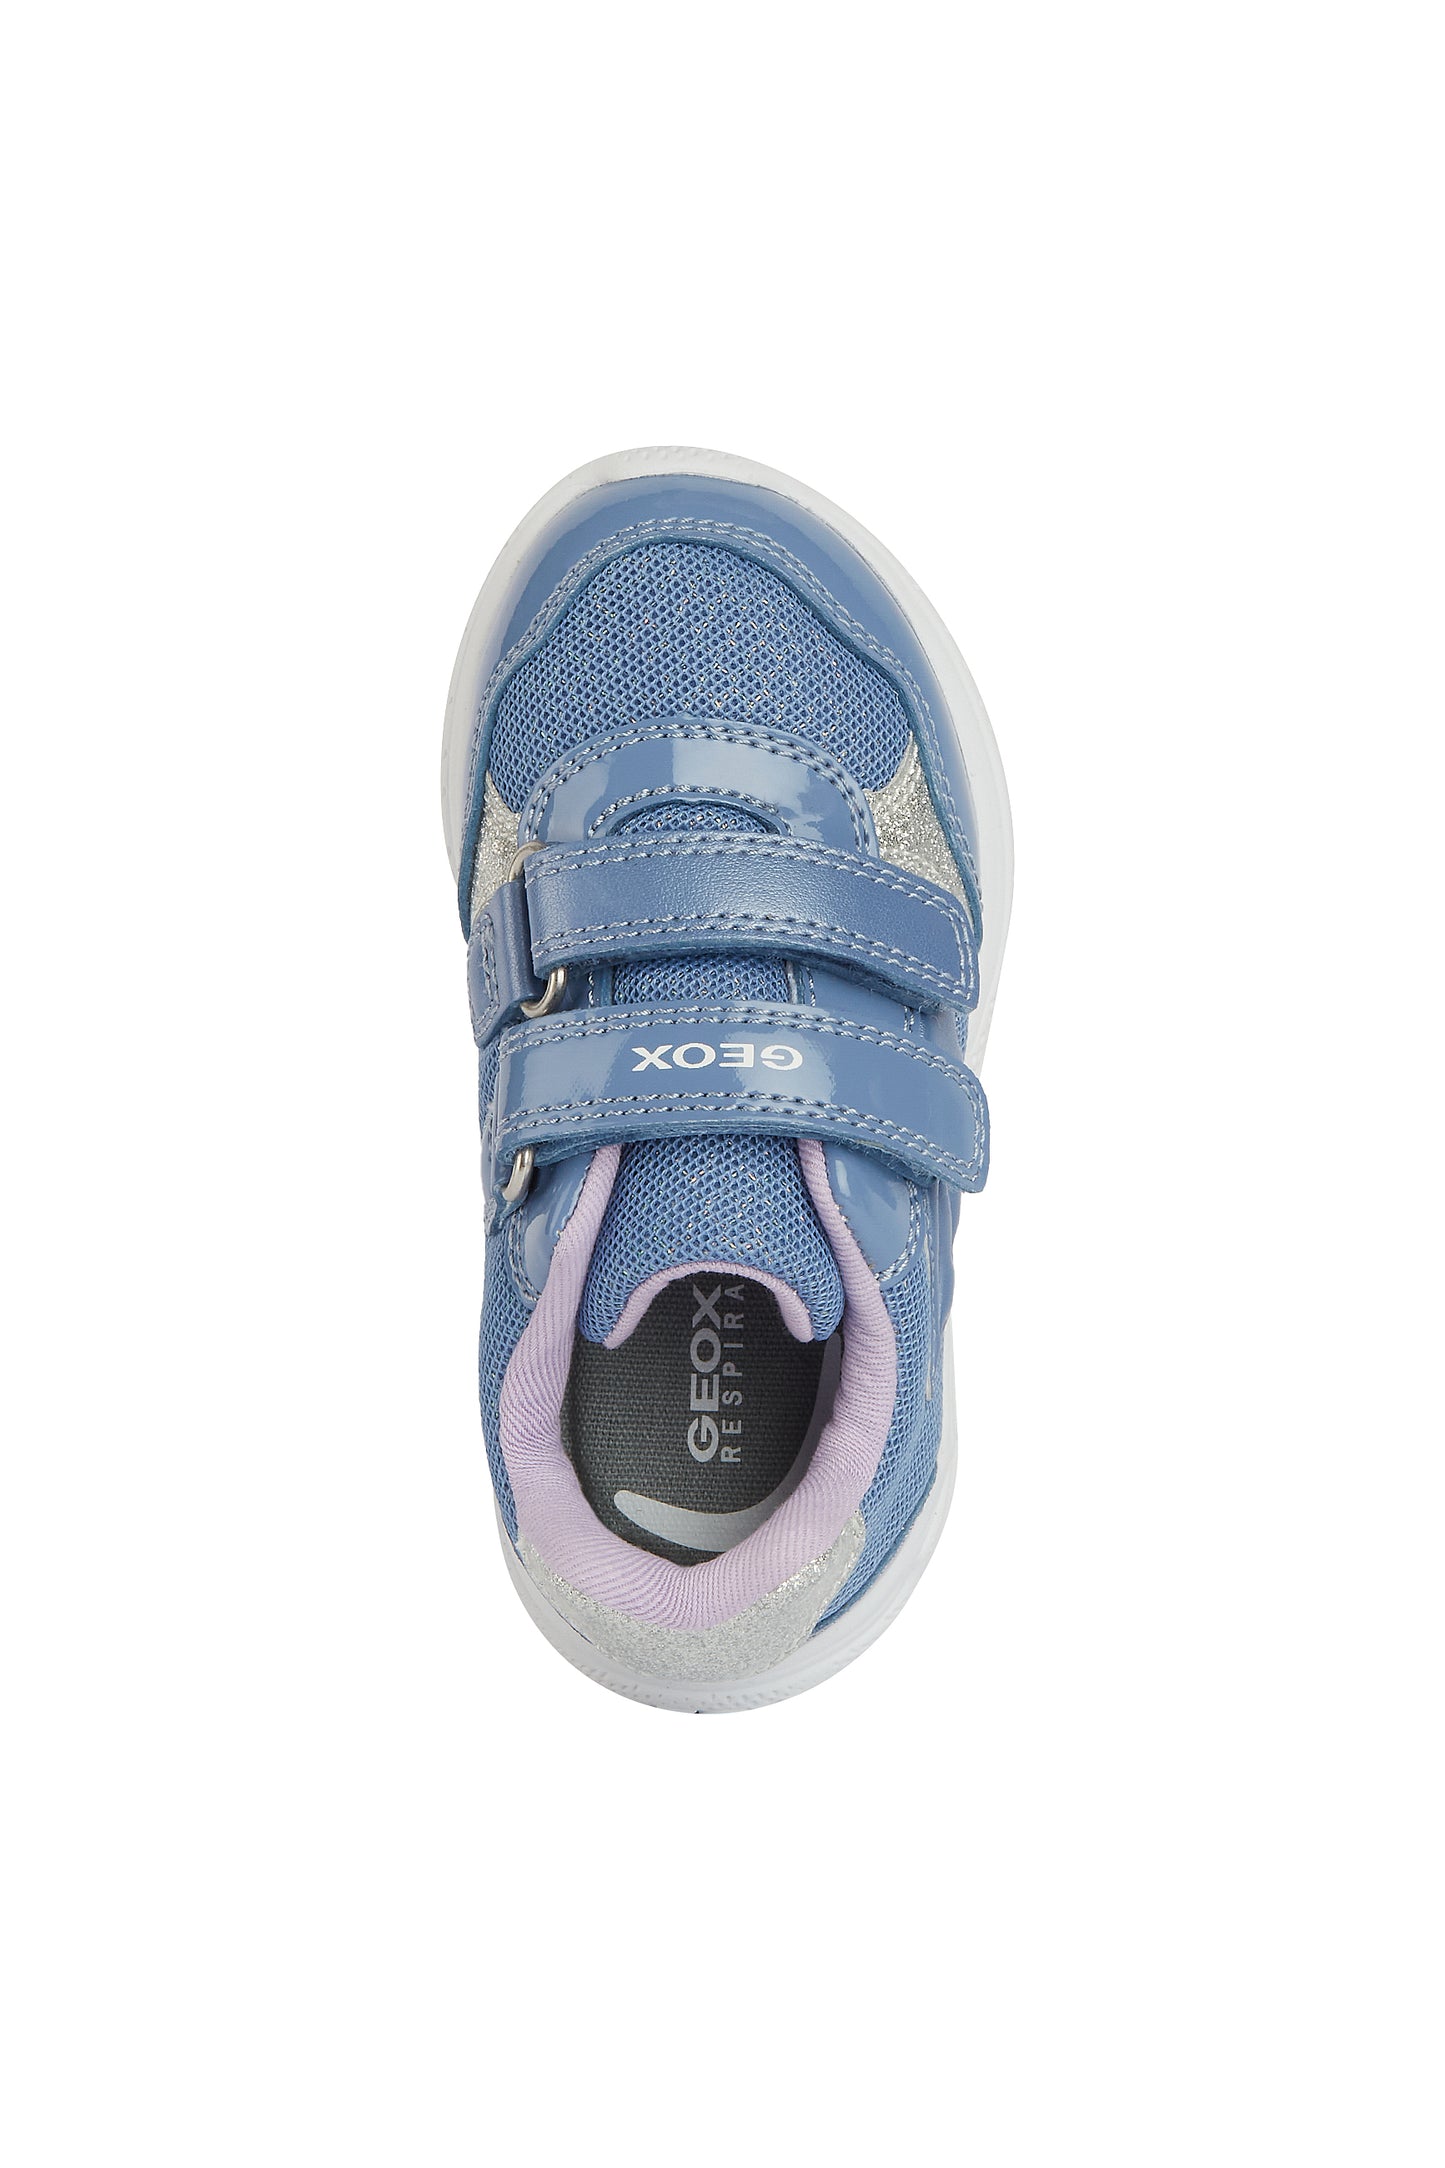 A girls trainer by Geox, style B Sprintye, in blue with silver glitter trim, wing detail and double velcro fastening. View from above.